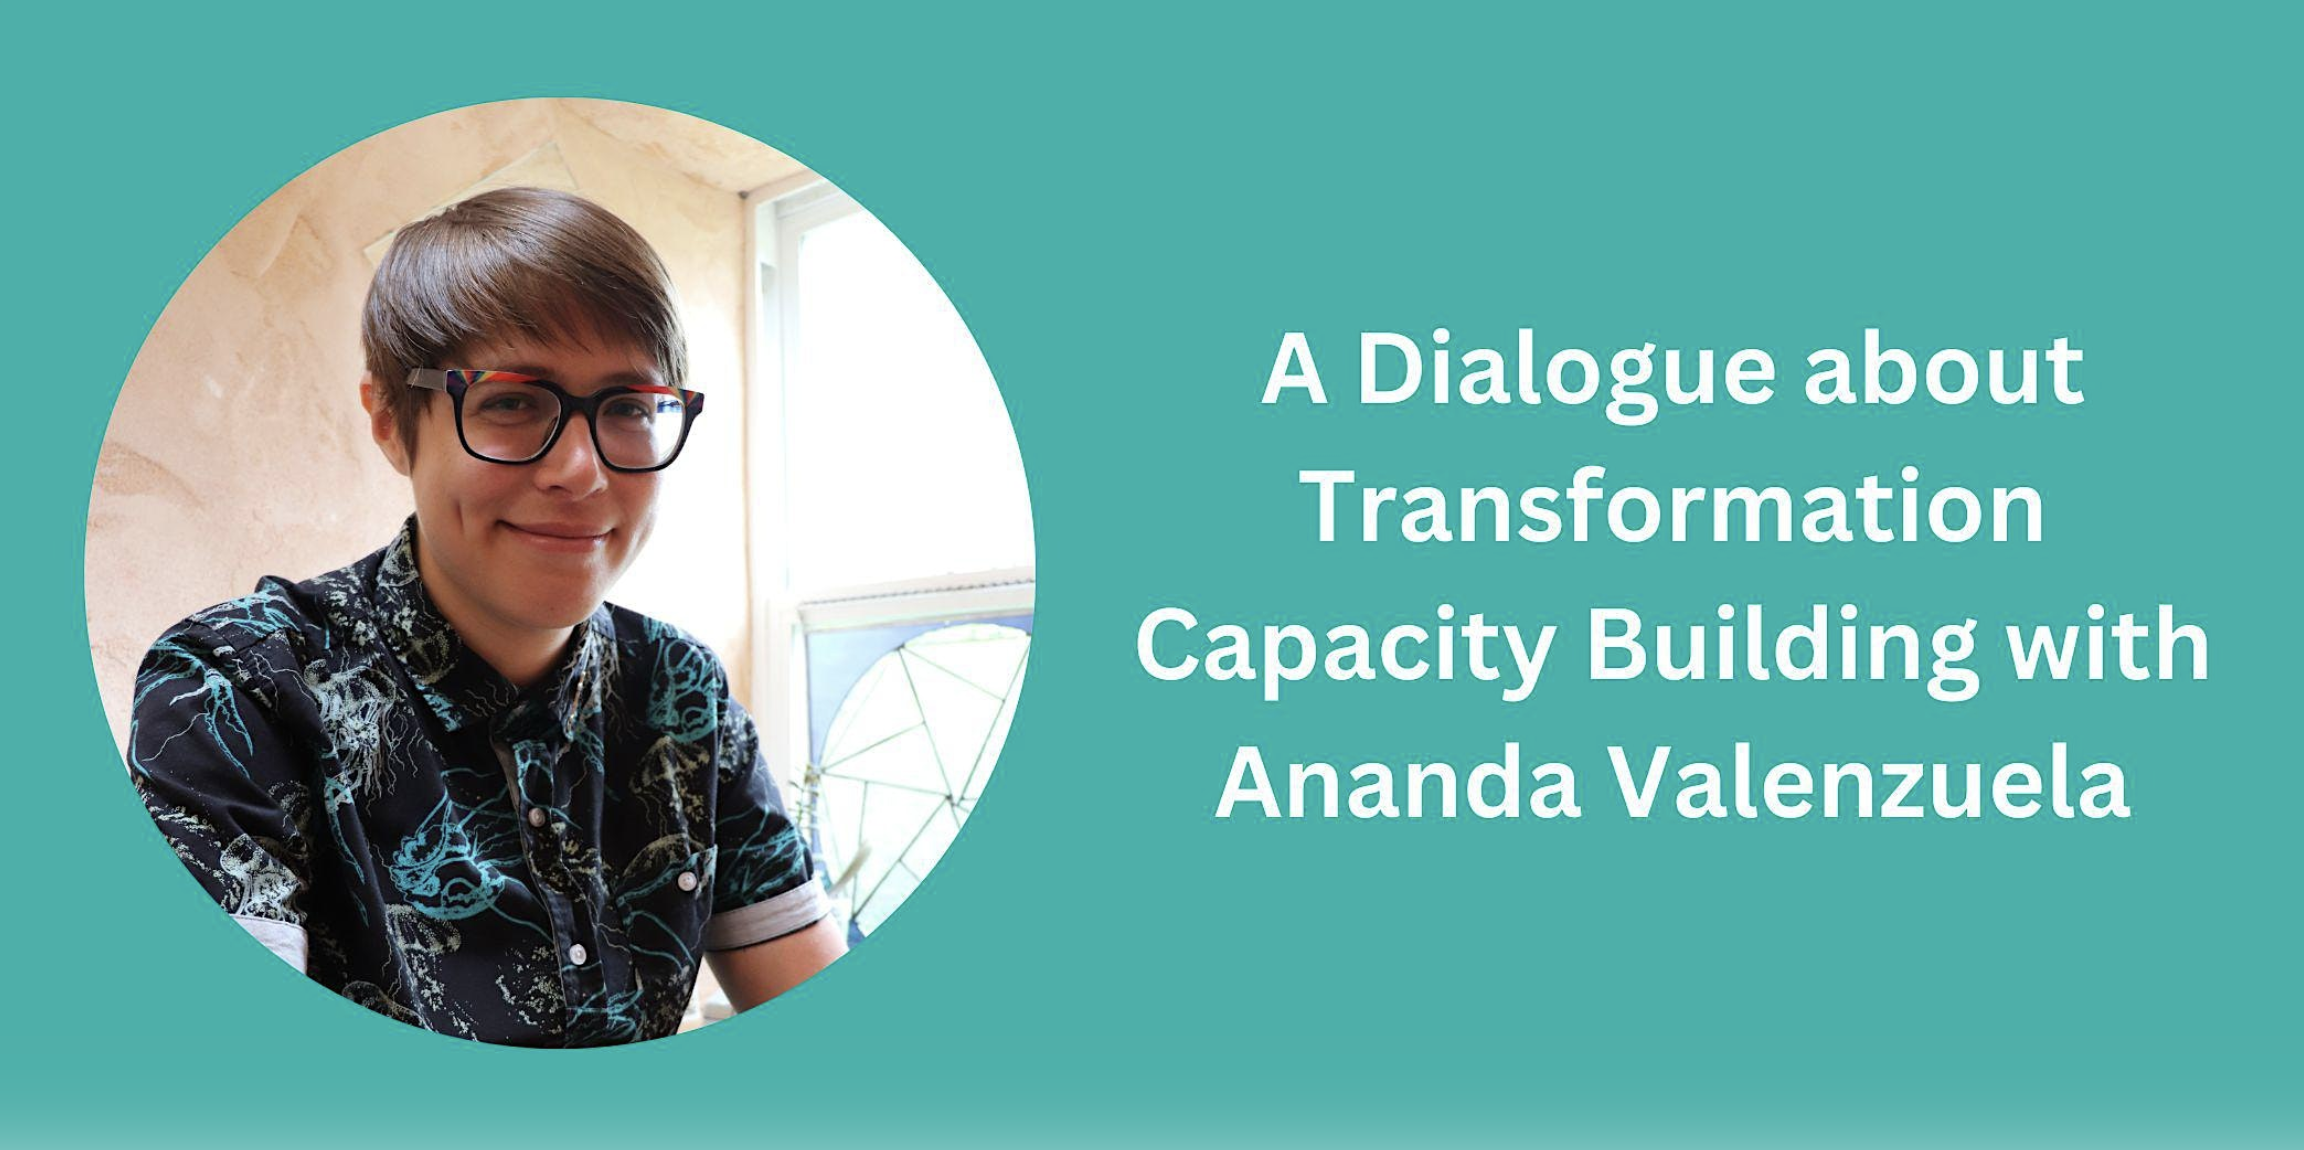 A Dialogue about Transformation Capacity Building with Ananda Valenzuela